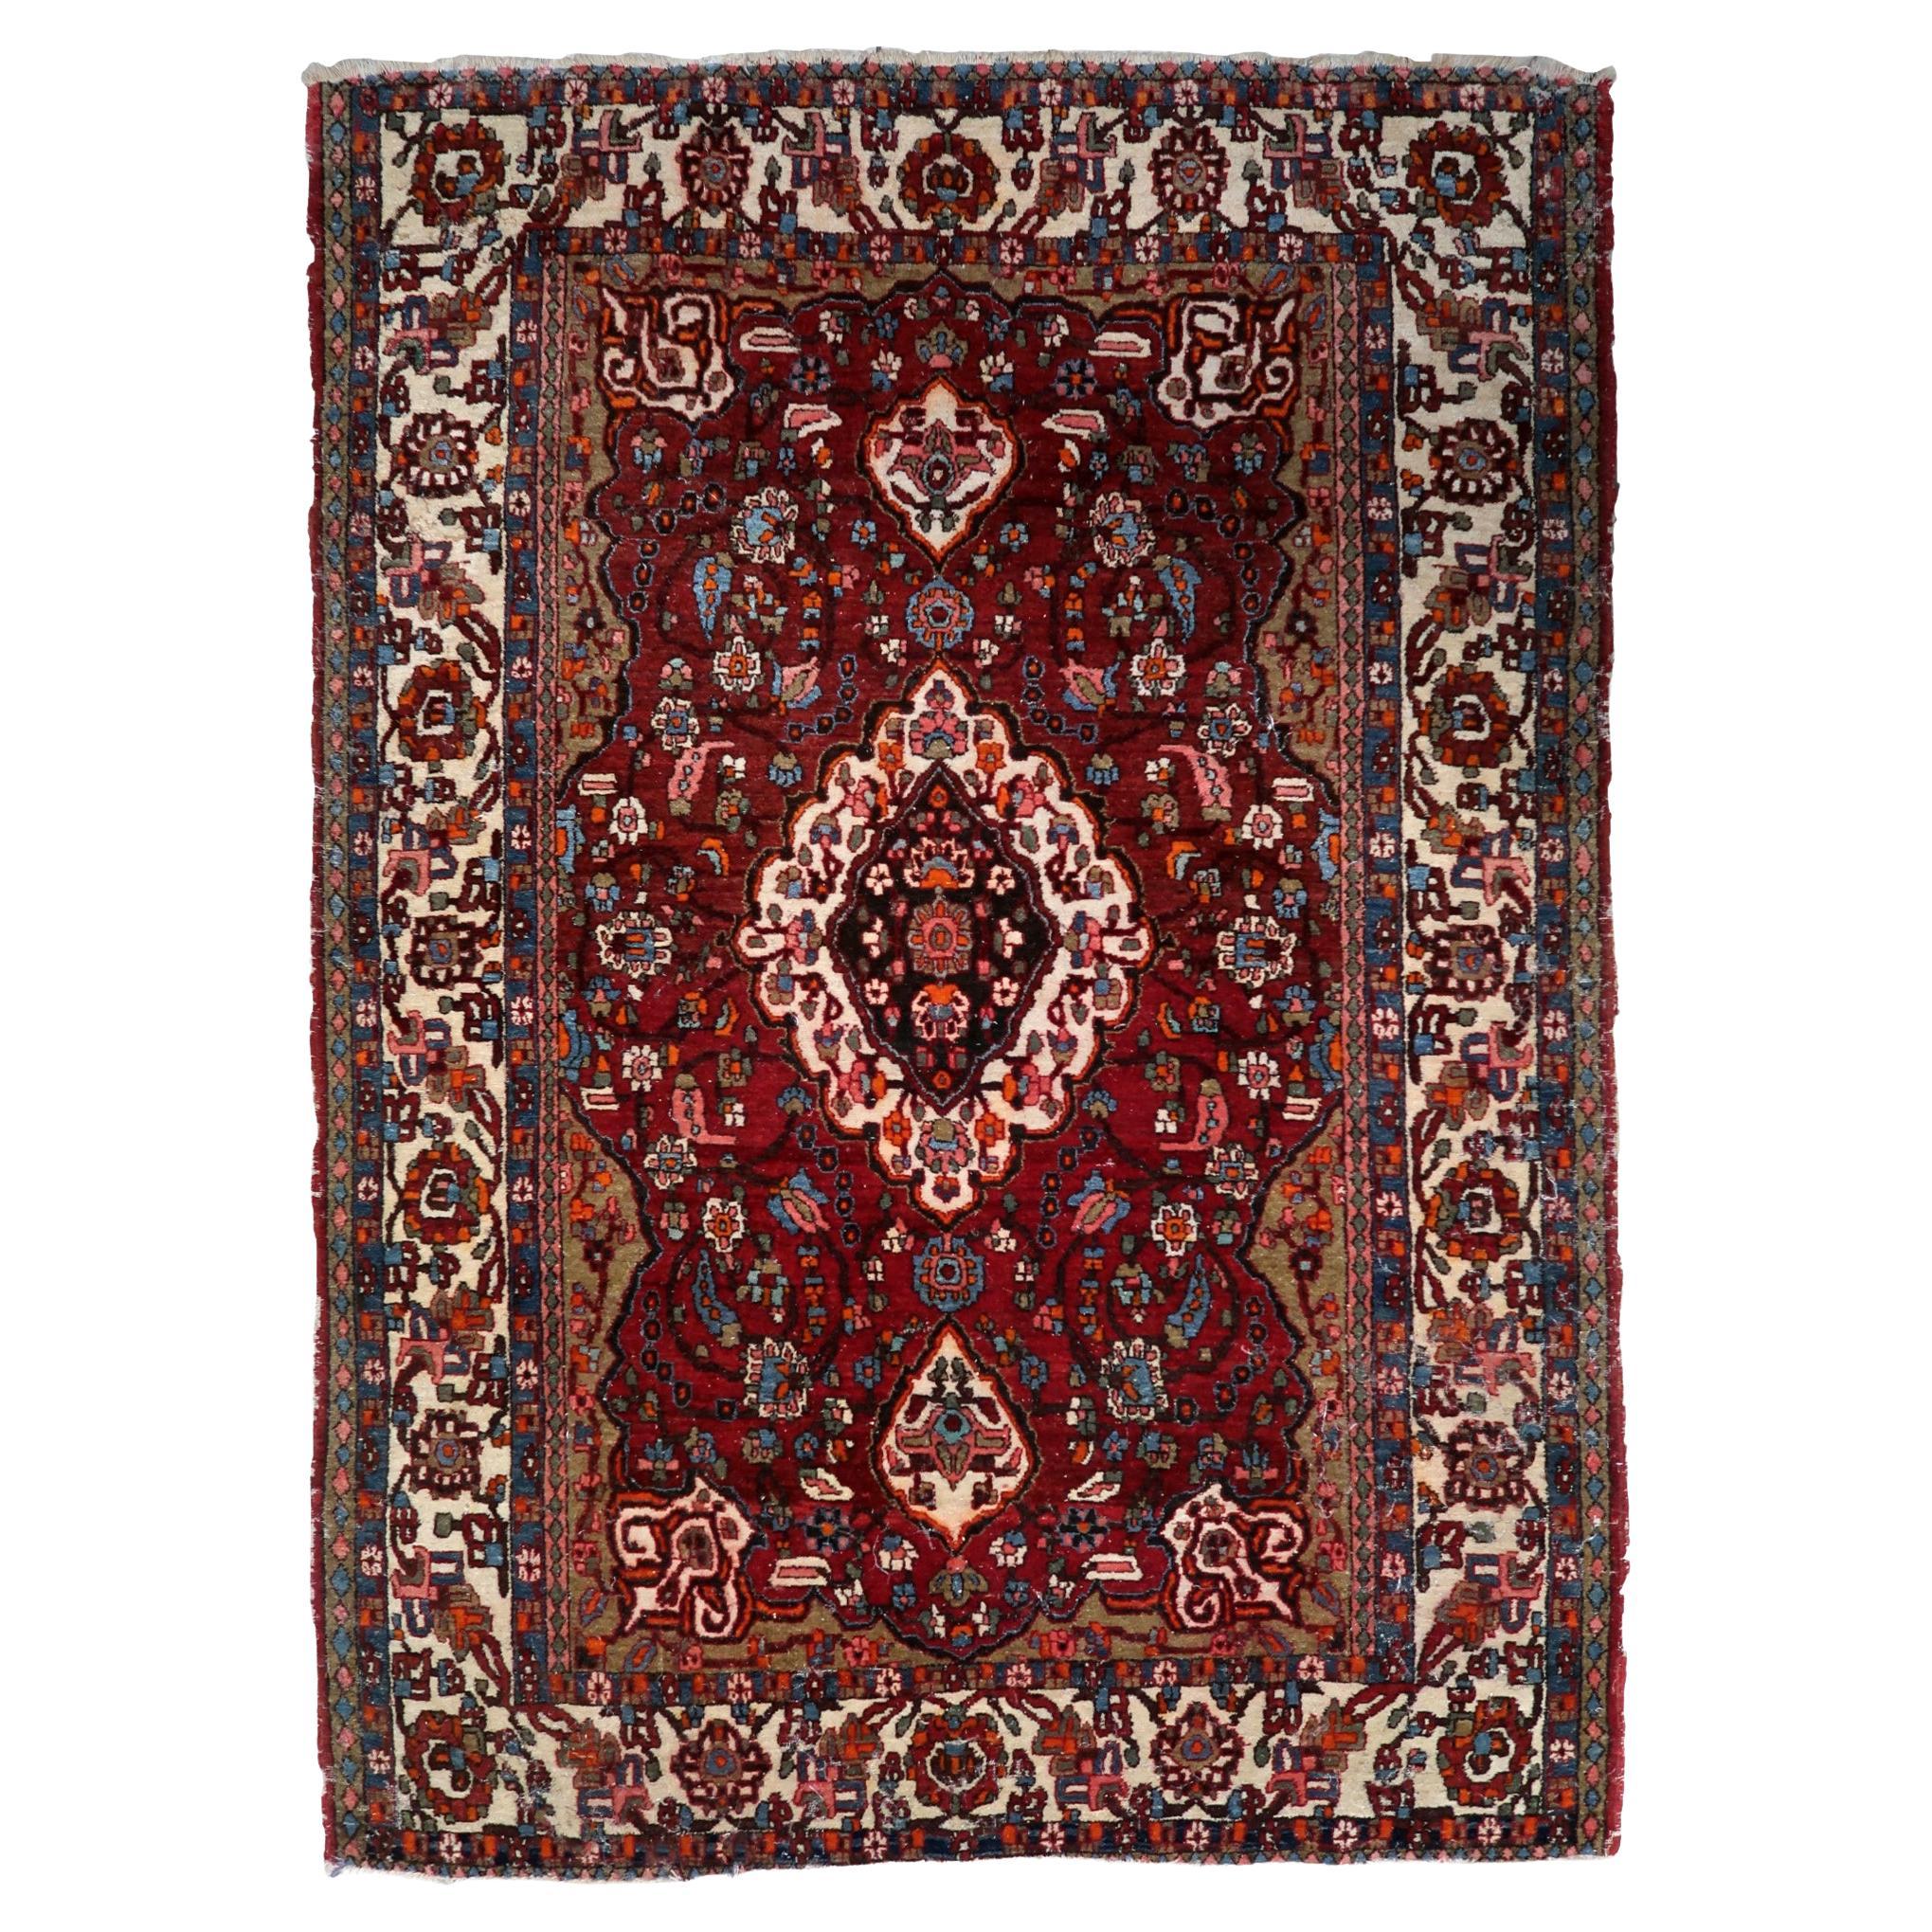 Handmade Vintage Persian Style Mahal Rug 1950s - 1C1080 For Sale